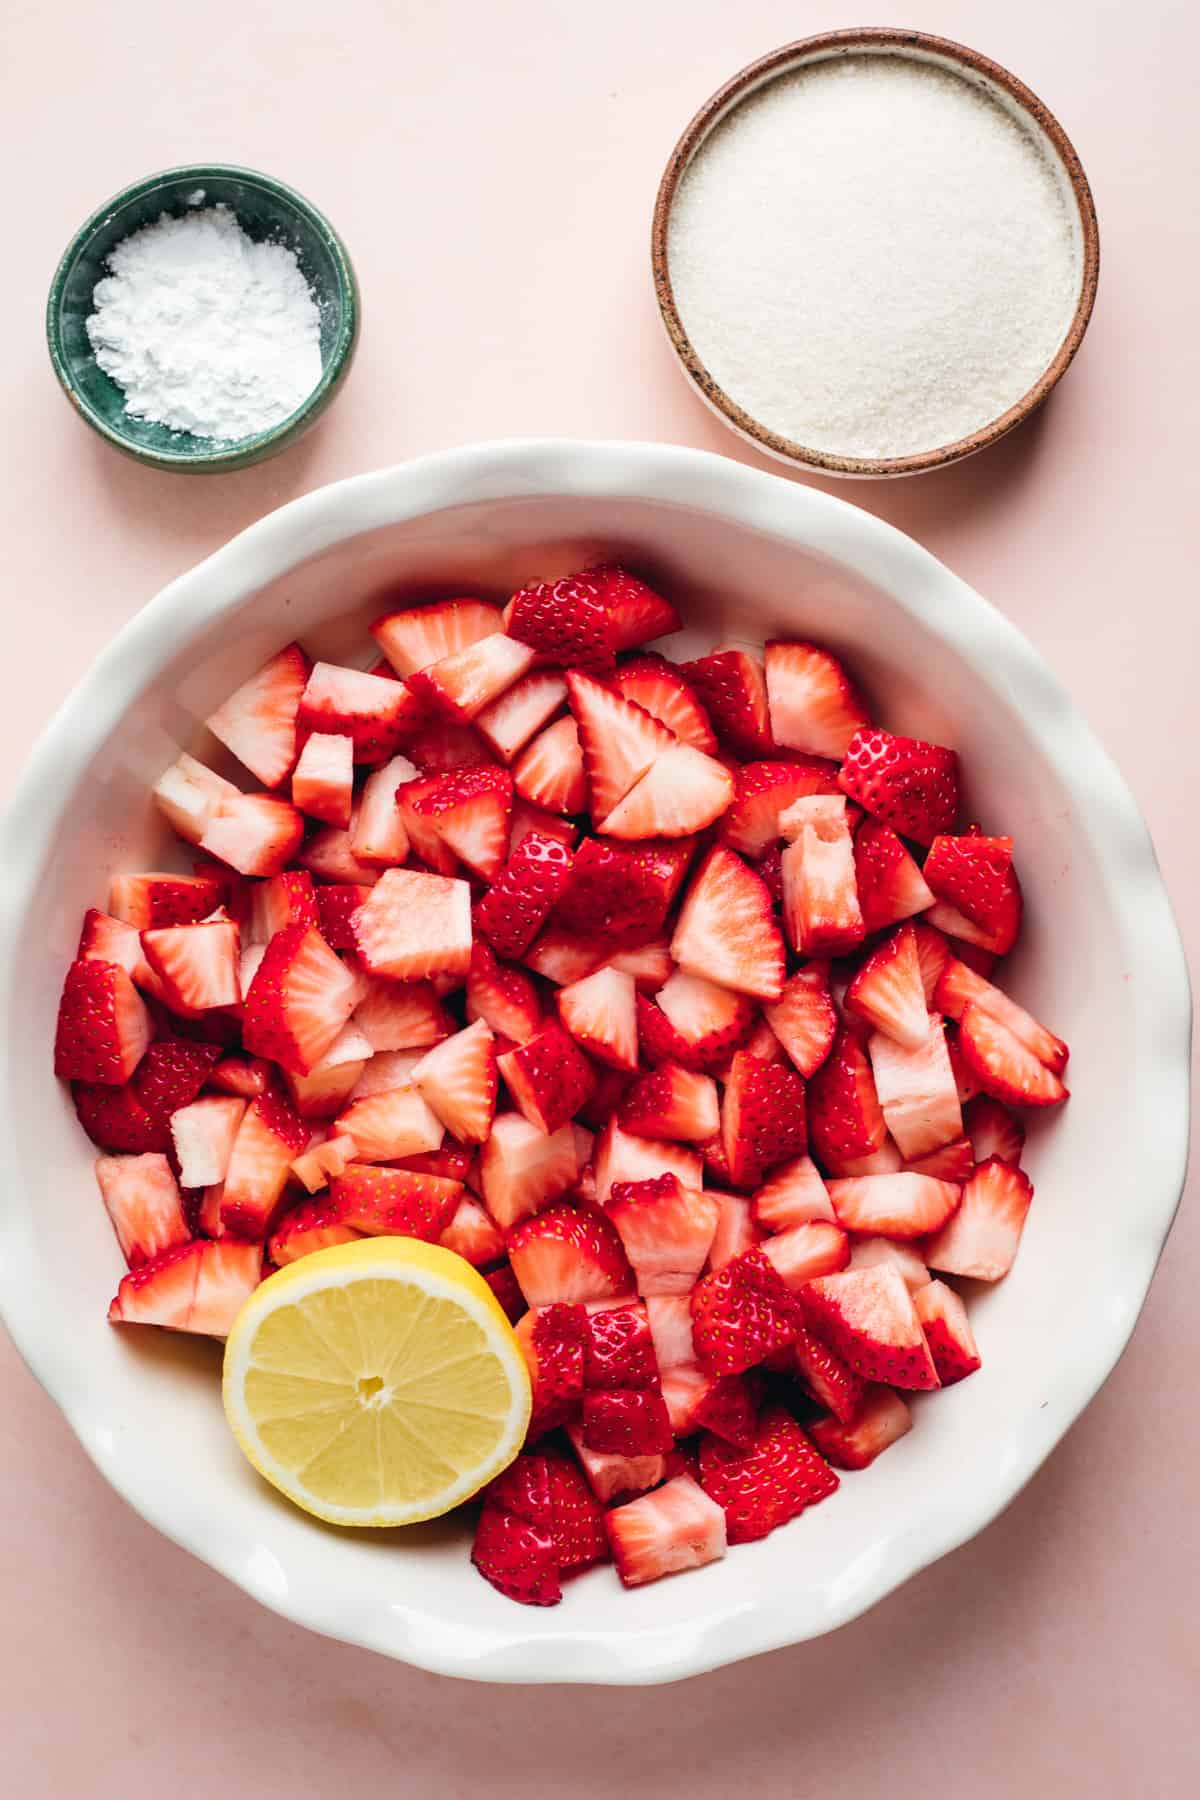 Chopped strawberries in a pie dish with a lemon, small bowls of cornstarch and sugar on the side.